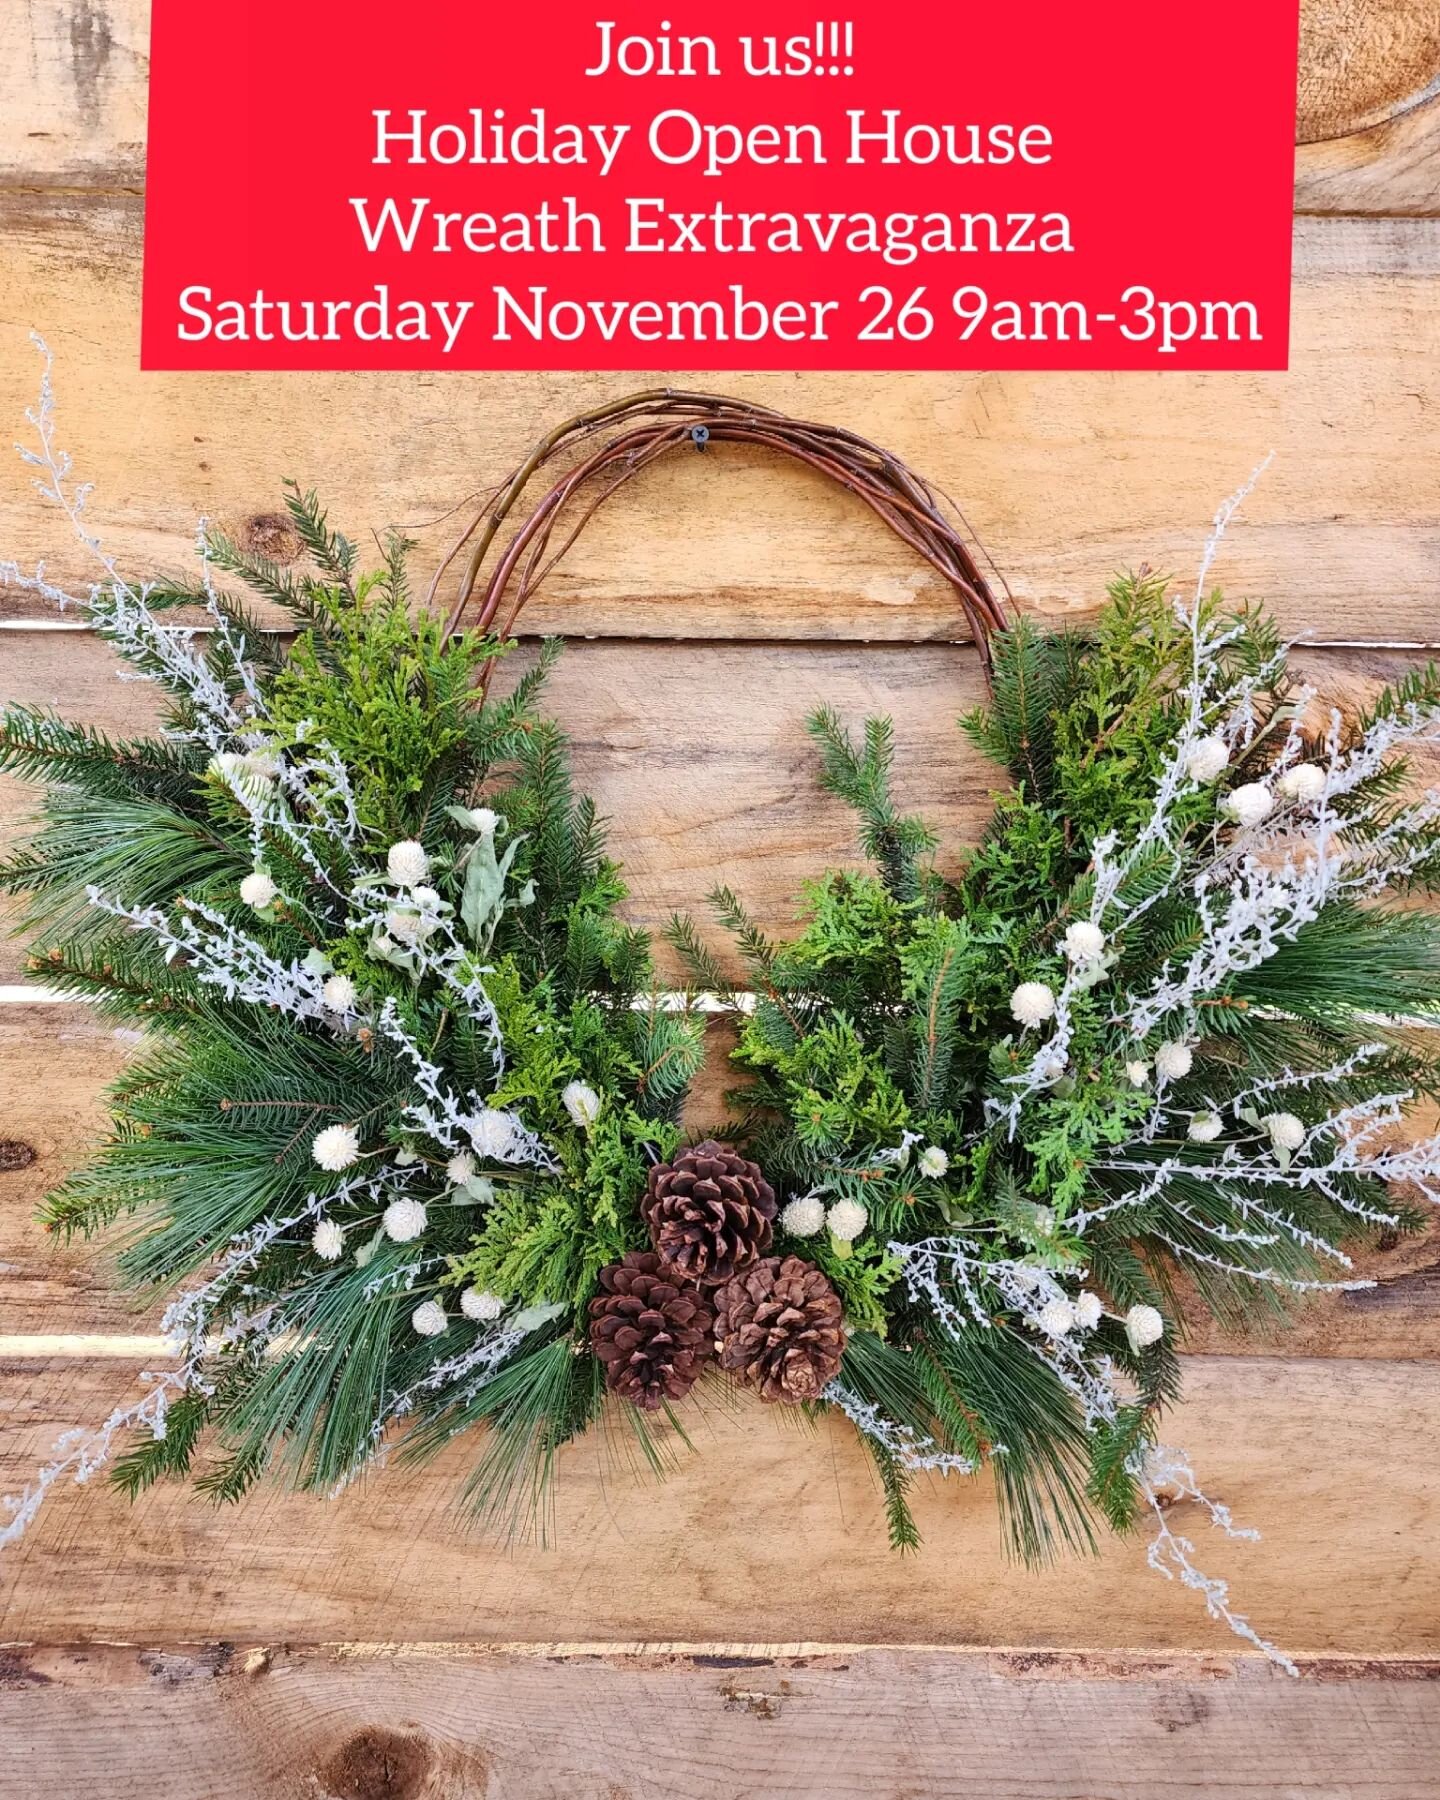 Bring a friend and join us for our Holiday Open House Wreath Extravaganza on Saturday, November 26 9am-3pm in our barn.  Come say hello and shop our hand-made wreaths.  We will have both evergreen and dried flower wreaths plus other items for decorat